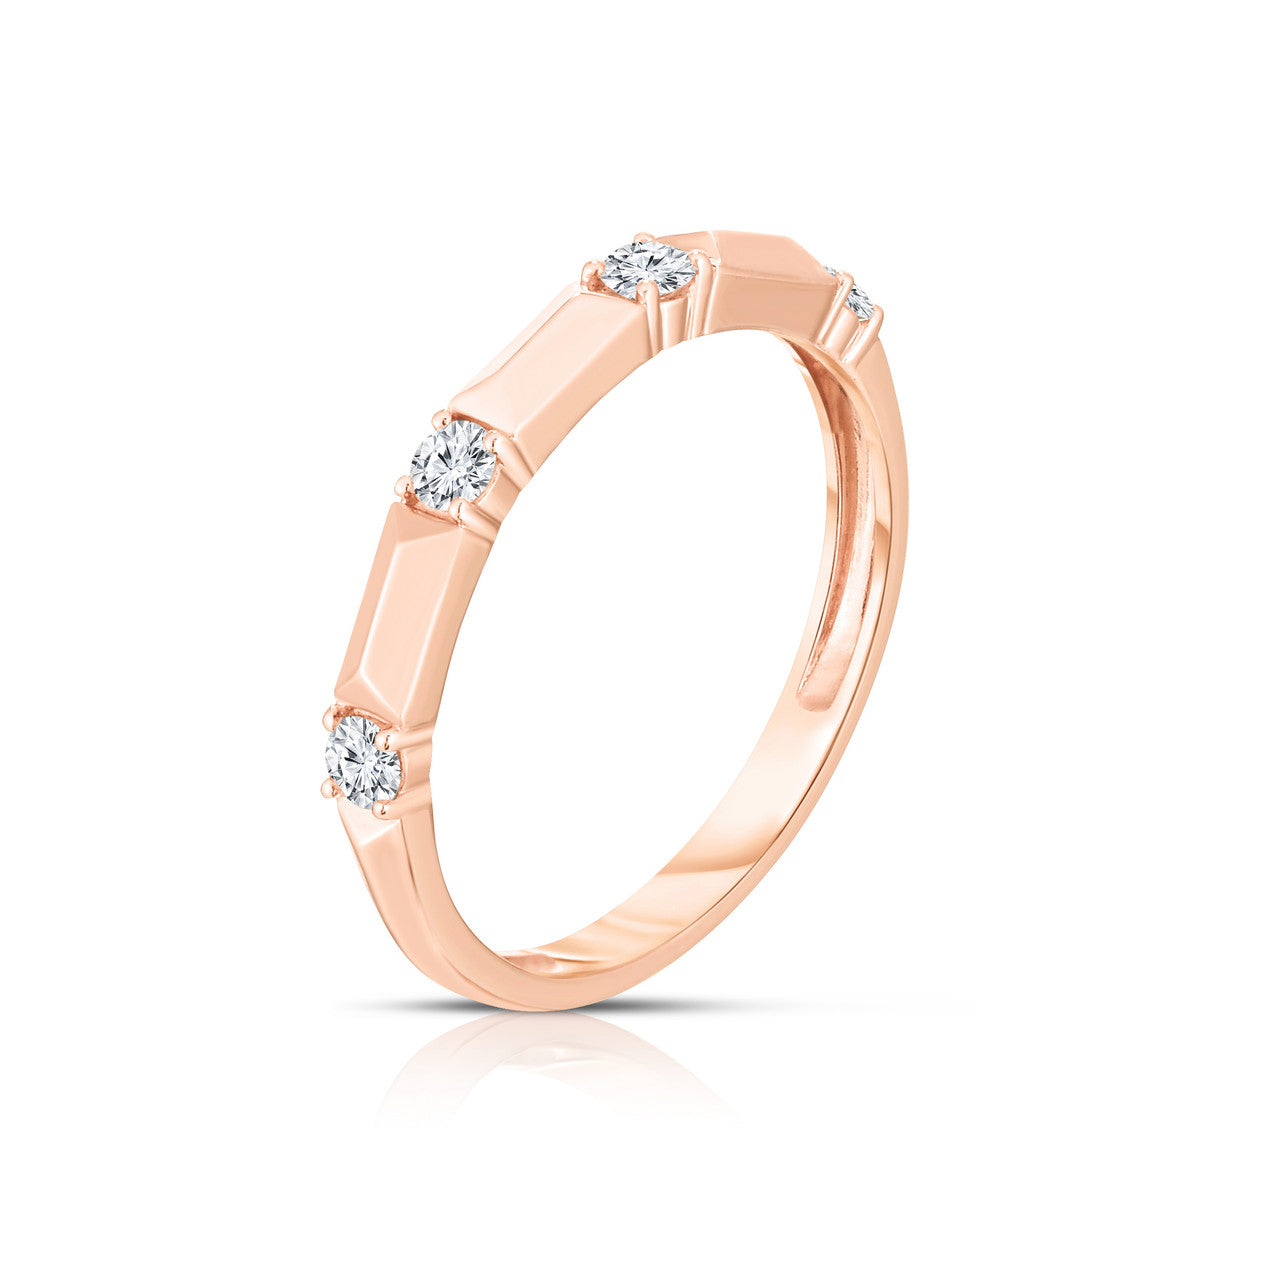 Gold and Diamond Pyramid Ring in Rose Gold